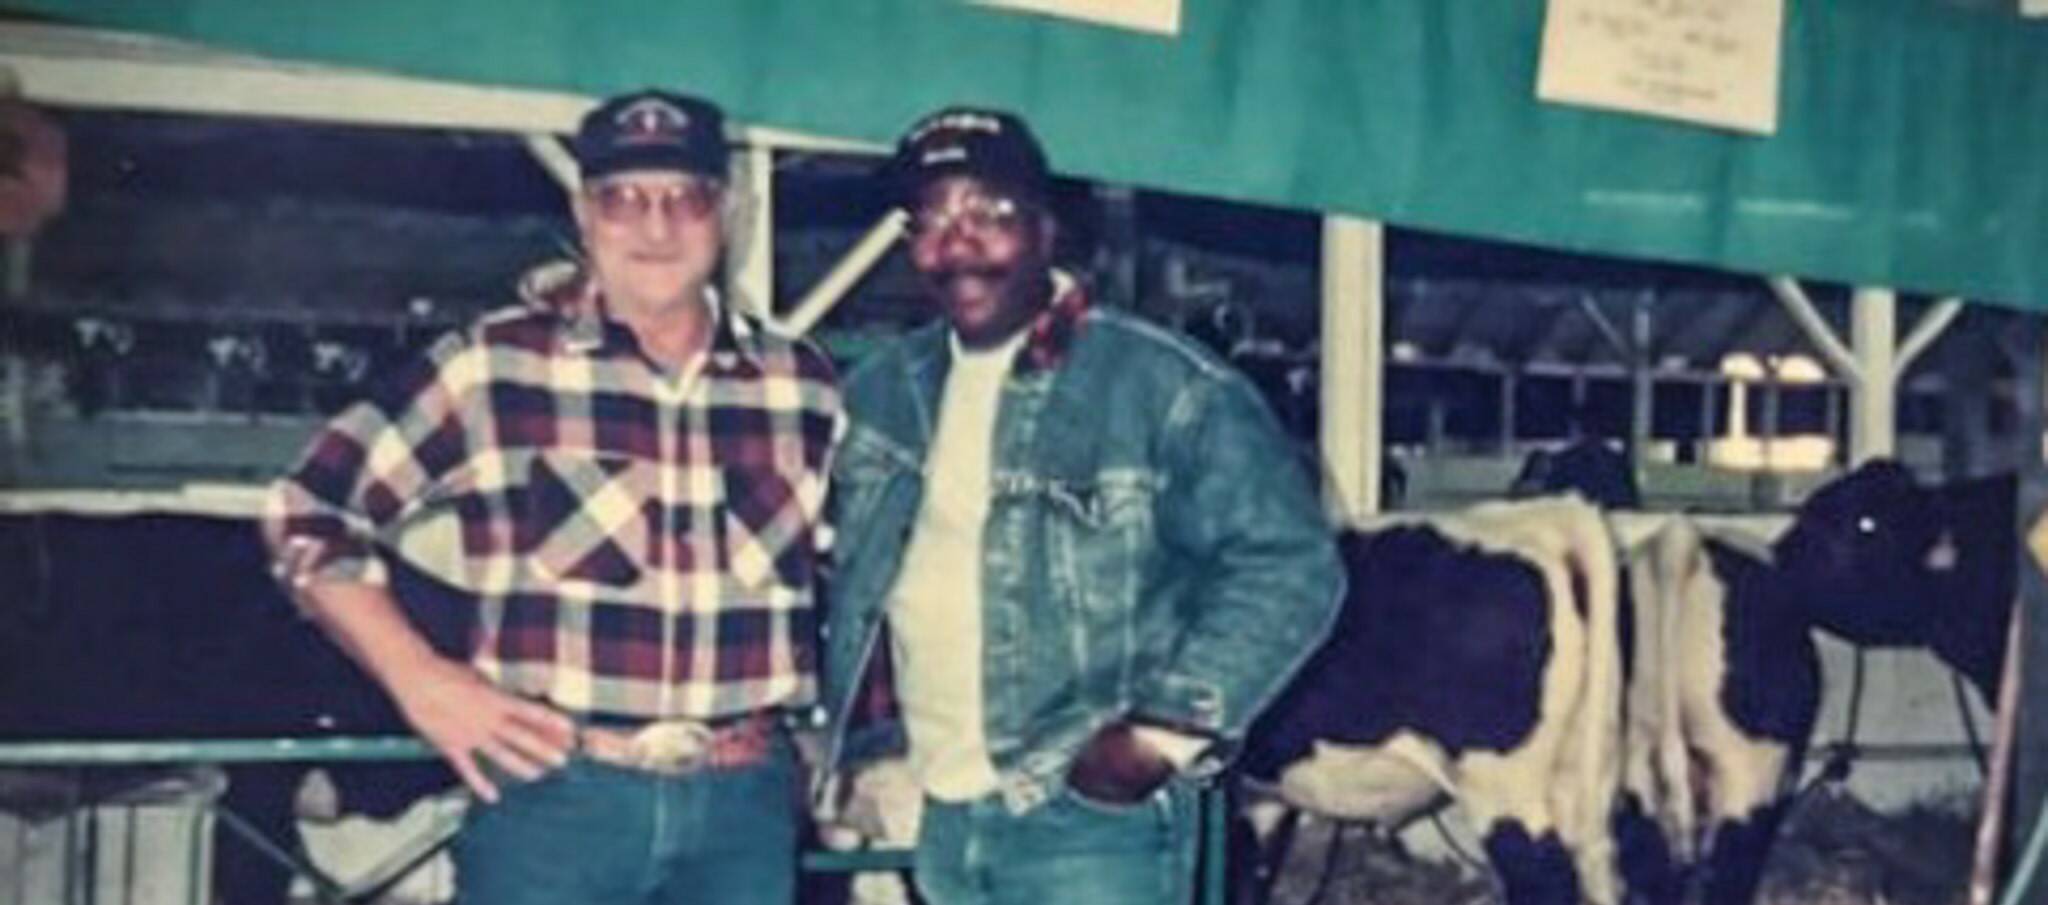 Eastern Washington cattle breeder Duane Mickelsen (left) and actor Carl Weathers (right) showing cattle at the Yakima County Fairgrounds. (Photo courtesty of Duane Mickelsen)